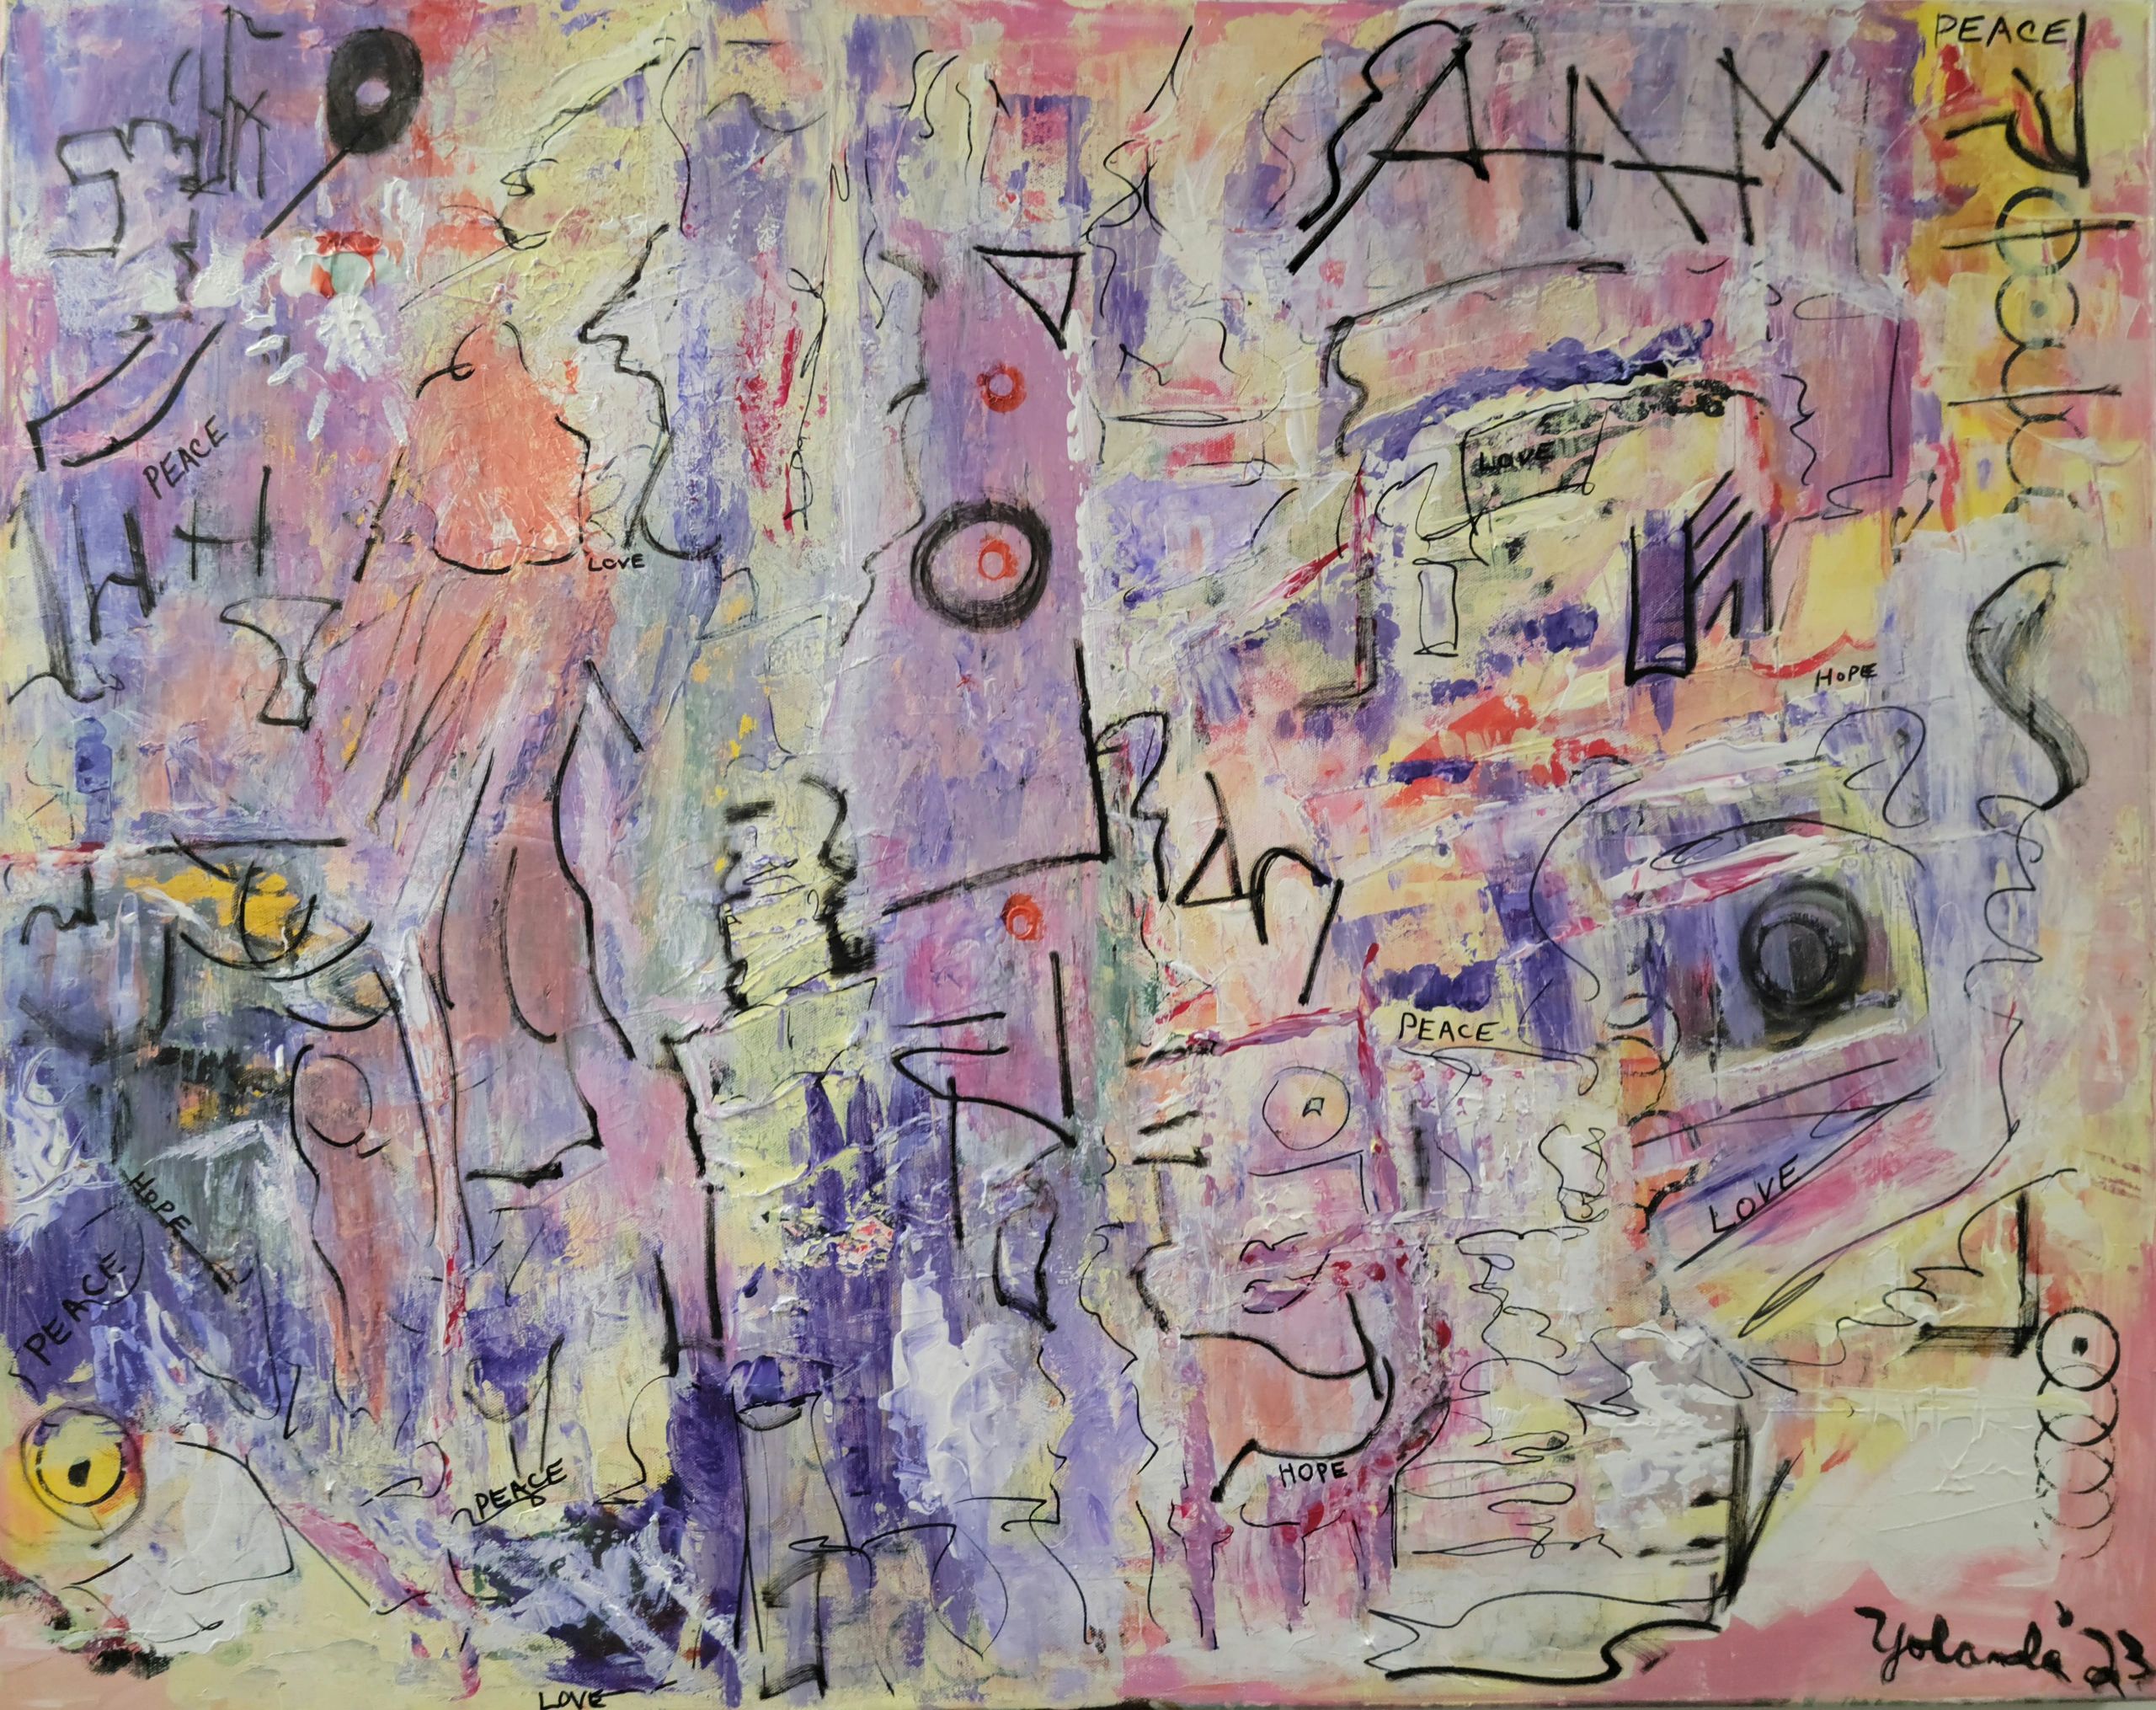 Basquiat impression, abstract expressionism, purple, pink, yellow with hard black lines, Peace, Hope